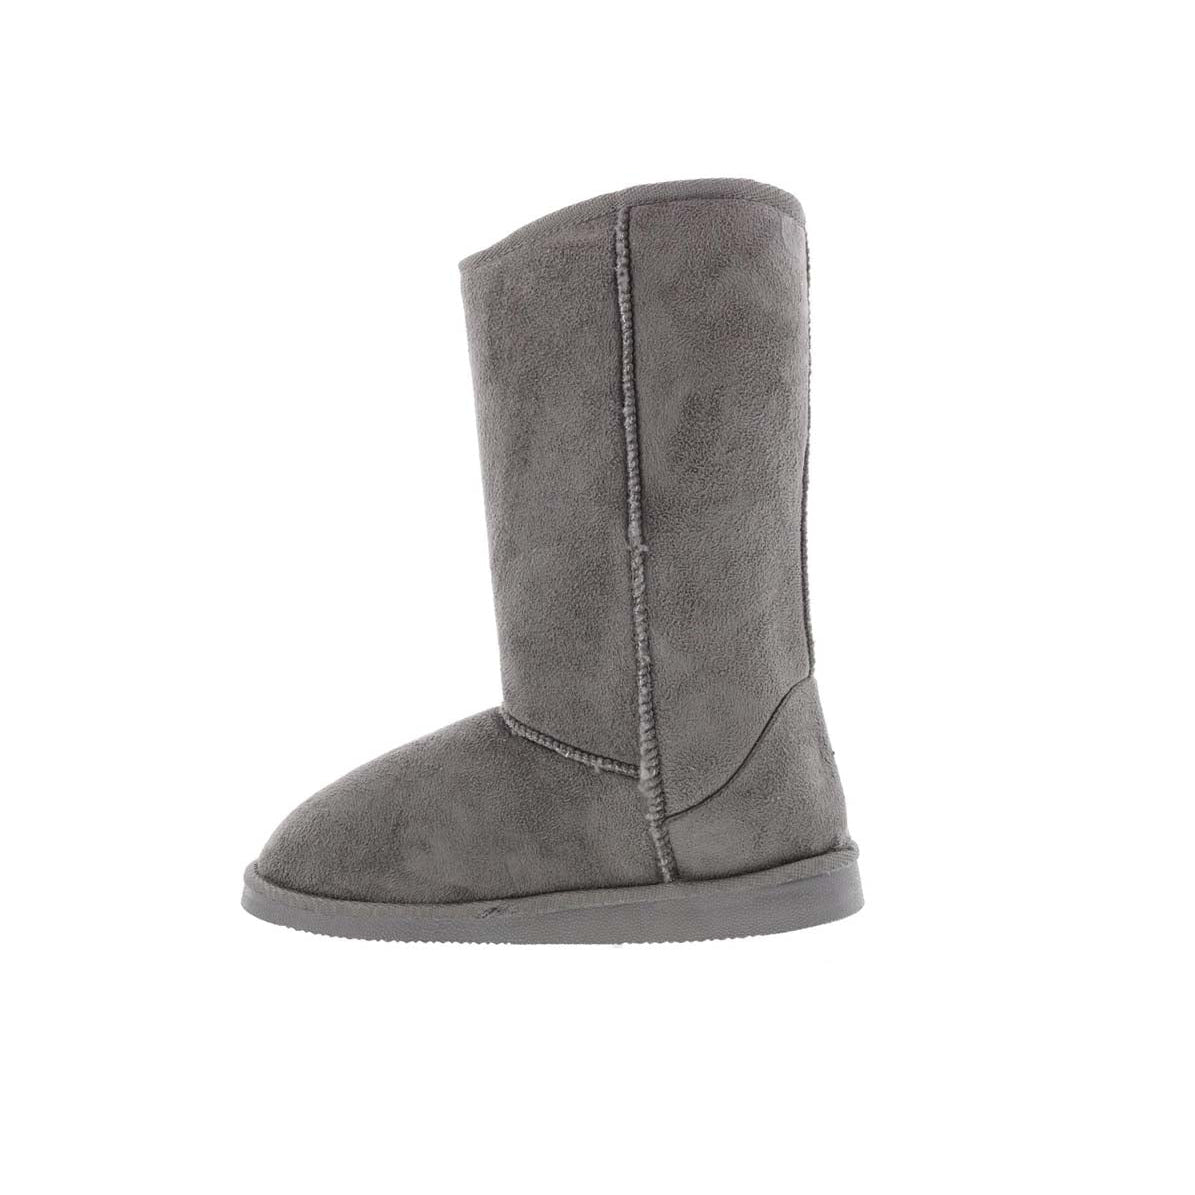 BELLINI AIRTIME WOMEN BOOT IN GREY MICROSUEDE - TLW Shoes